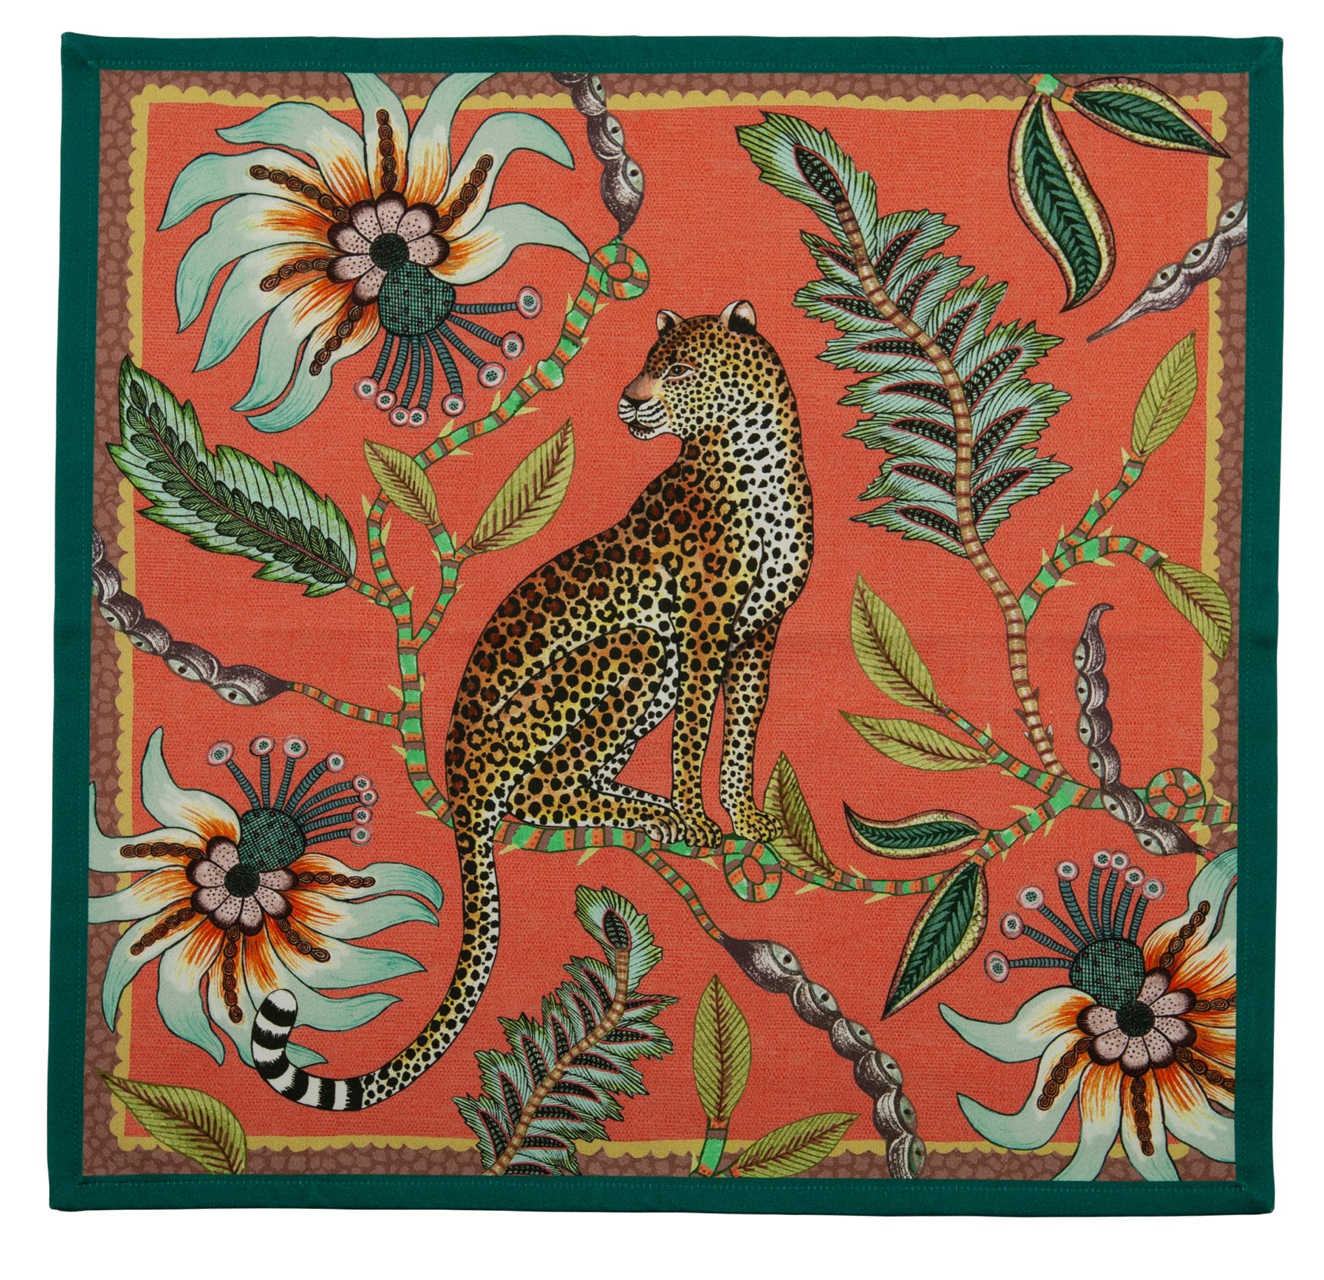 Ardmore "Leopard Coral" napkin sets made in South Africa